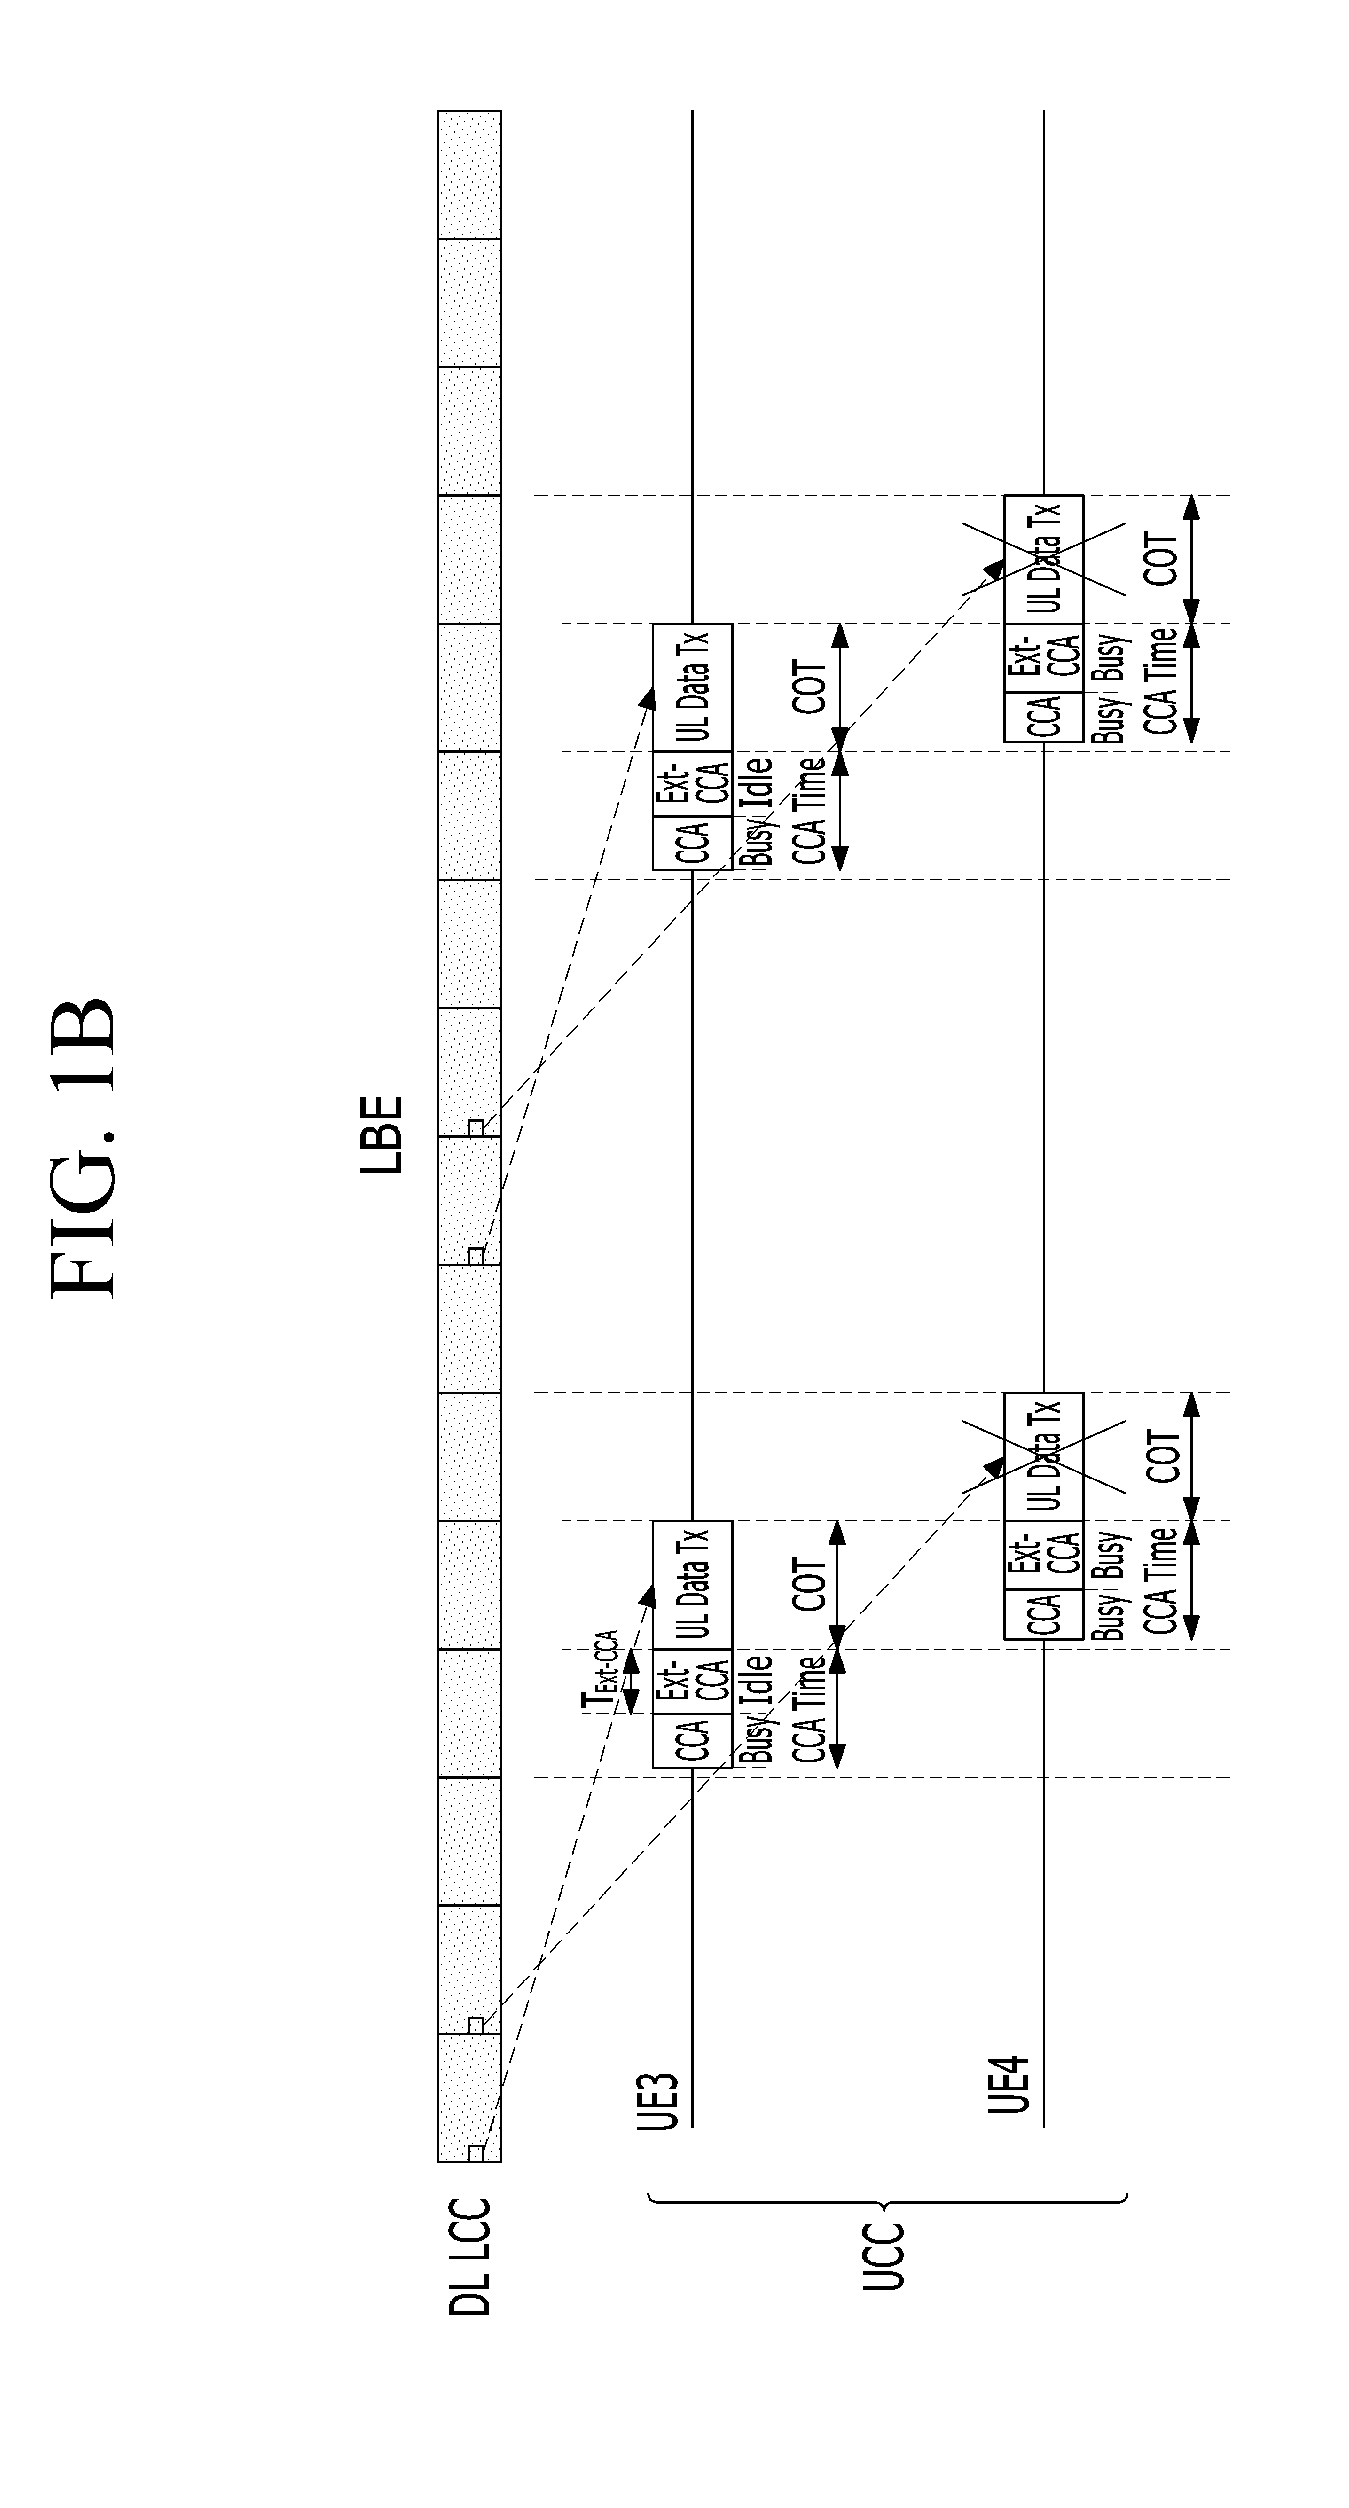 Apparatus for transmitting and receiving data through unlicensed band